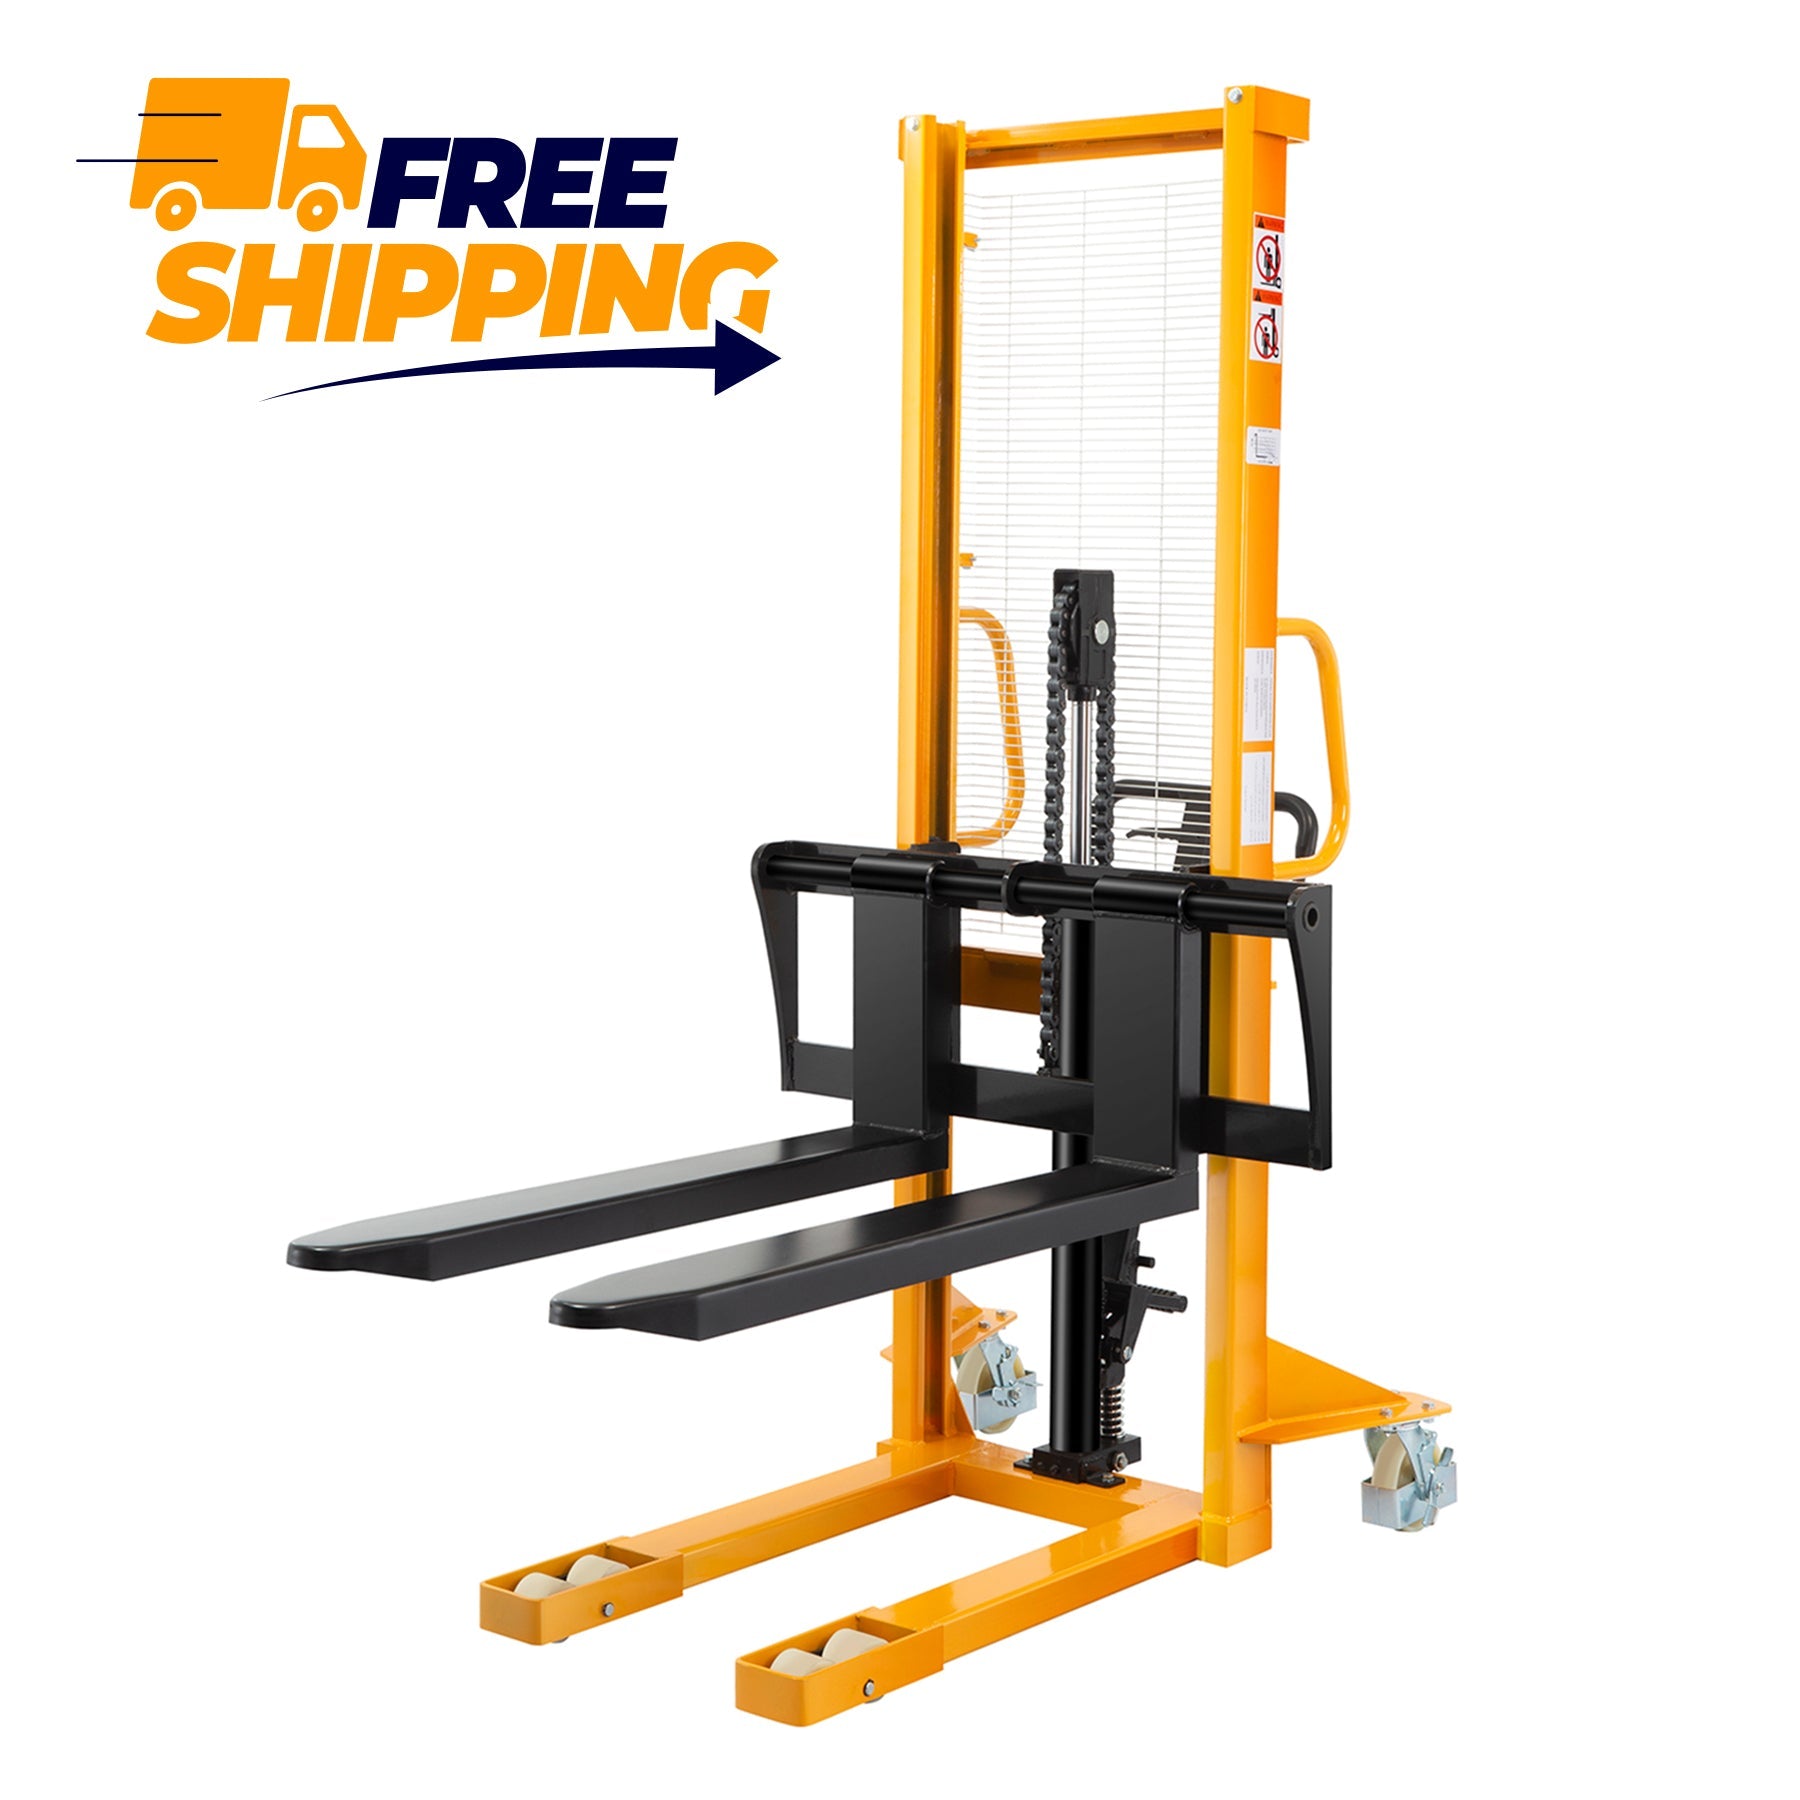 ApolloLift | Manual Hydraulic Stacker Pallet Stacker Adjustable Forks 2200lbs Cap. 63" Lift Height A-3003